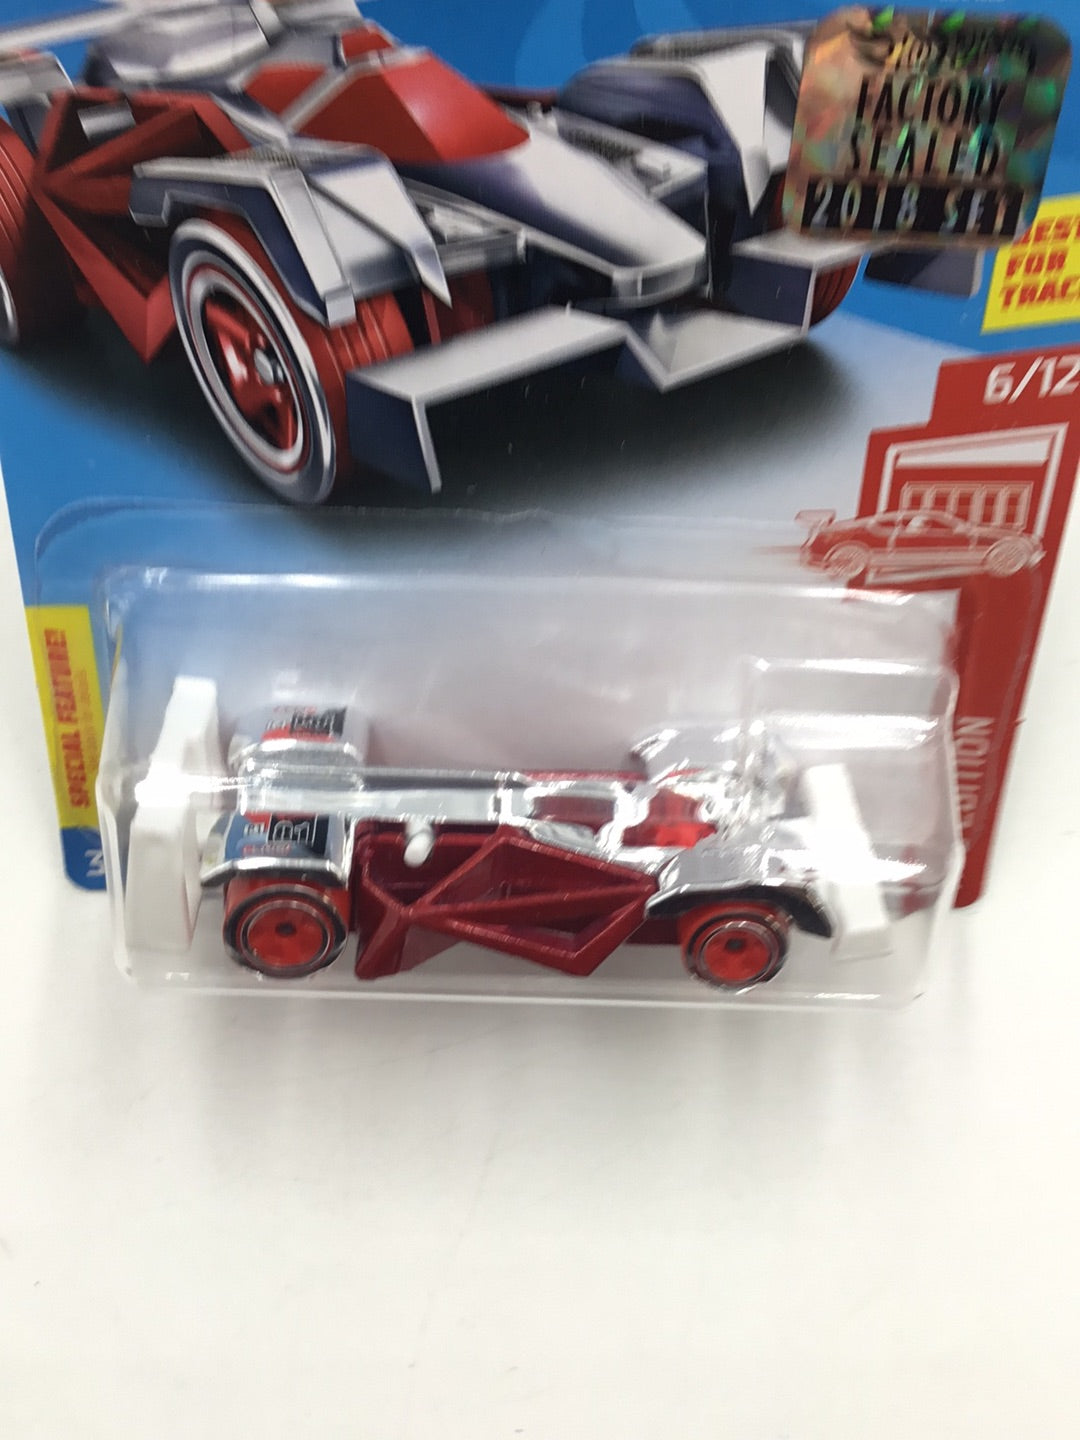 2018 hot wheels red edition #6 Flash Drive target red factory sealed sticker